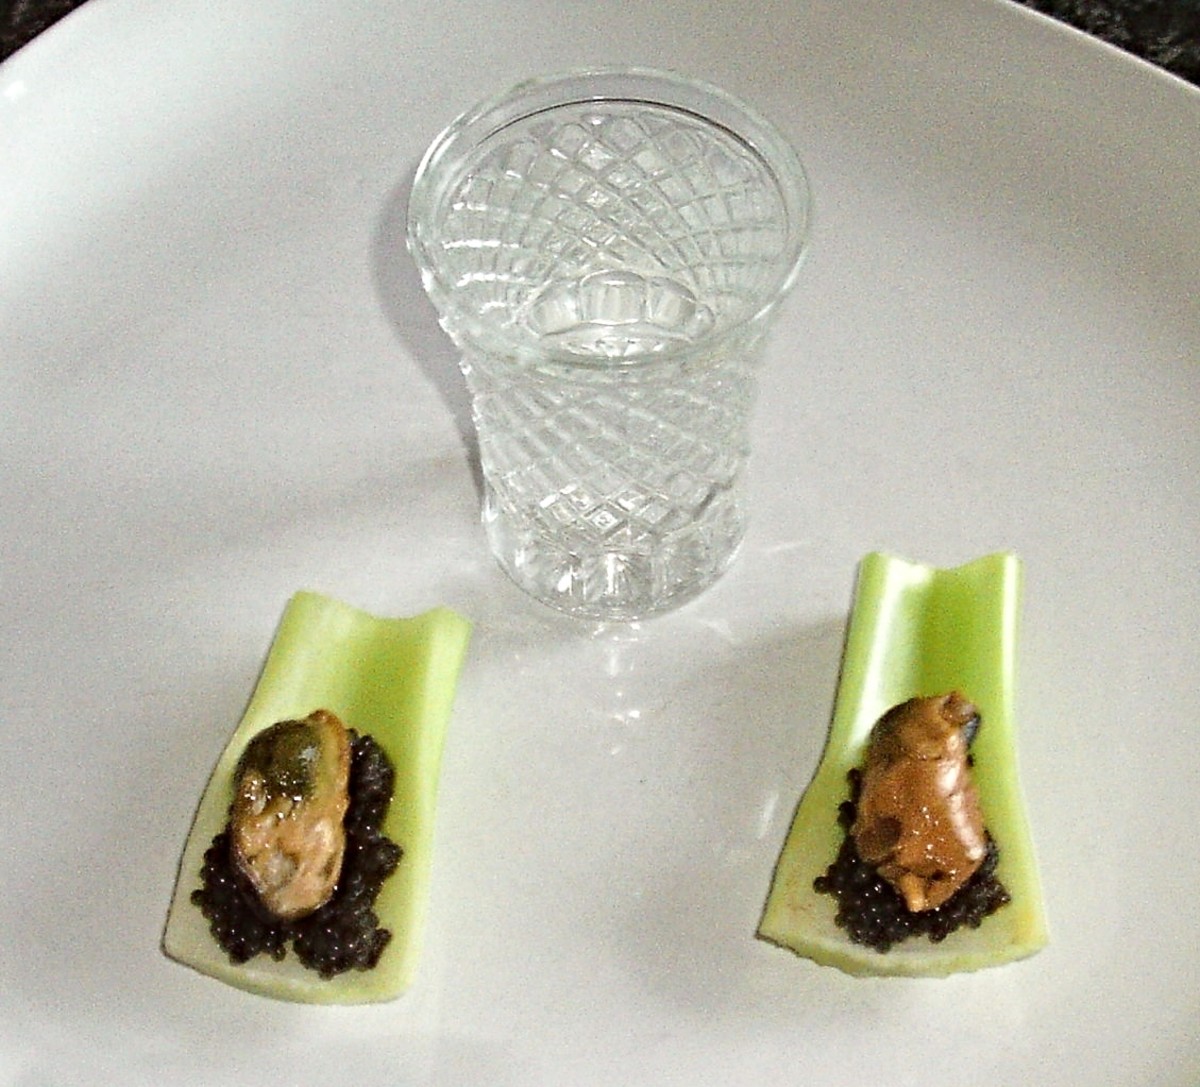 Smoked mussels and caviar are served on celery spoons with vodka shot